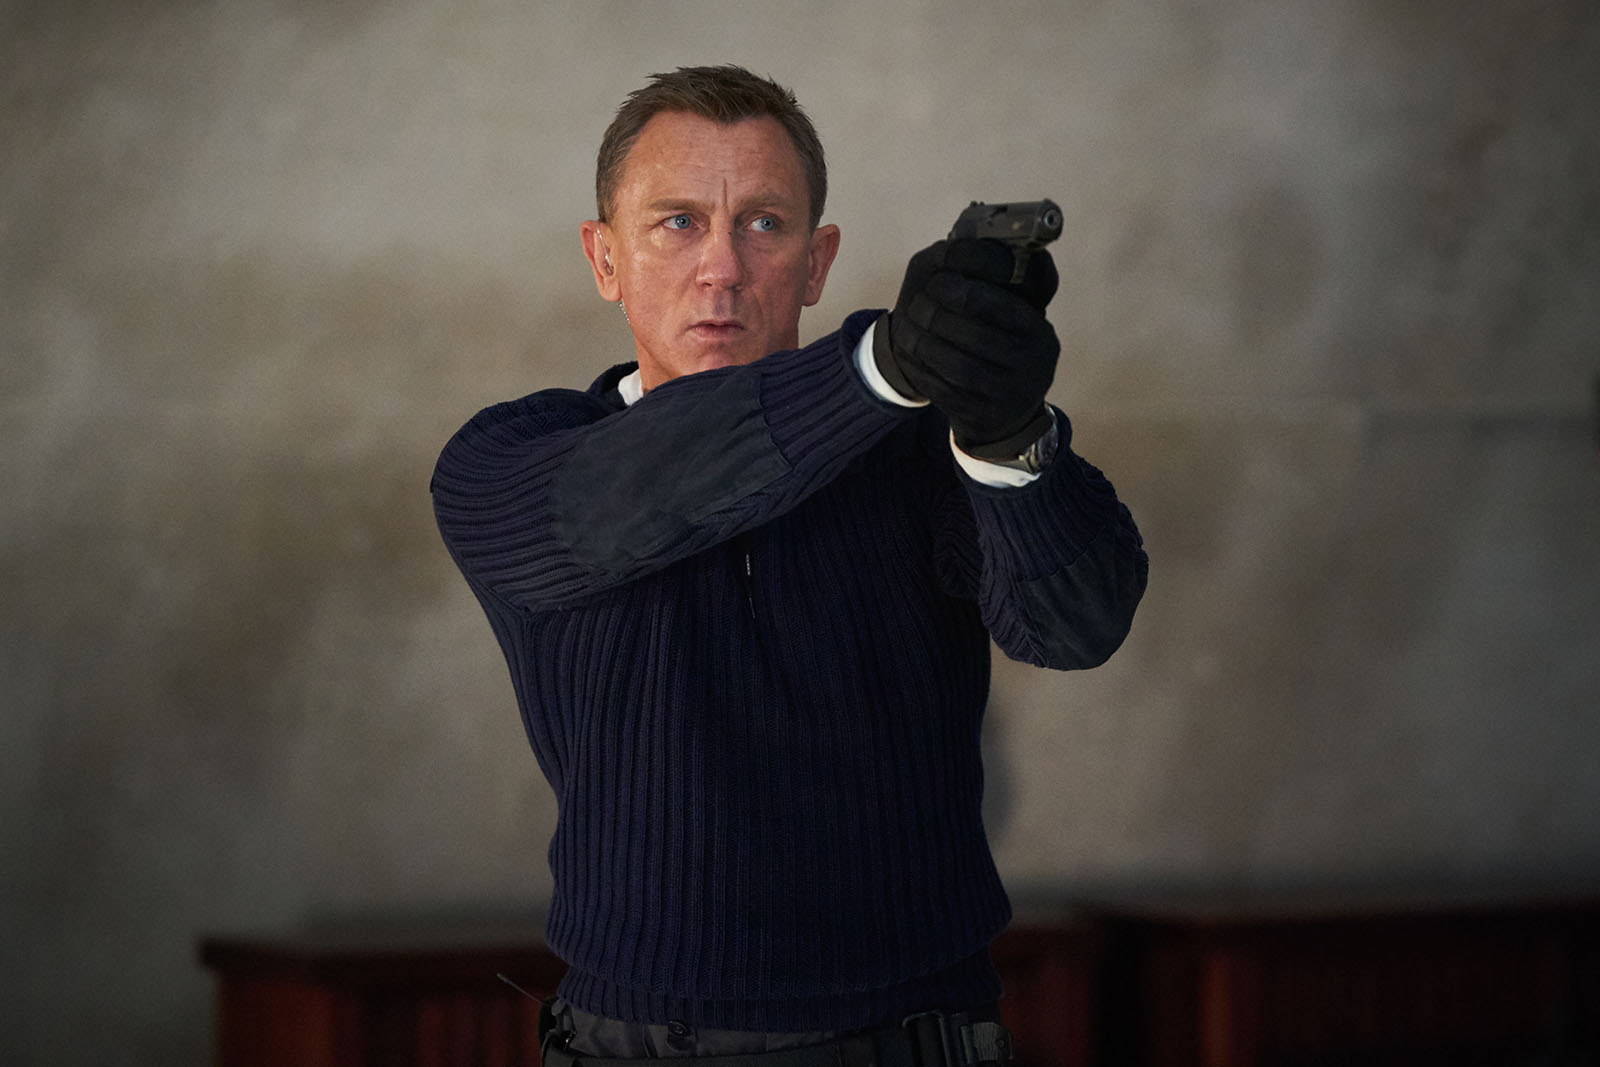 Daniel Craig points Bond’s Walther PPK for the last time in No Time to Die.